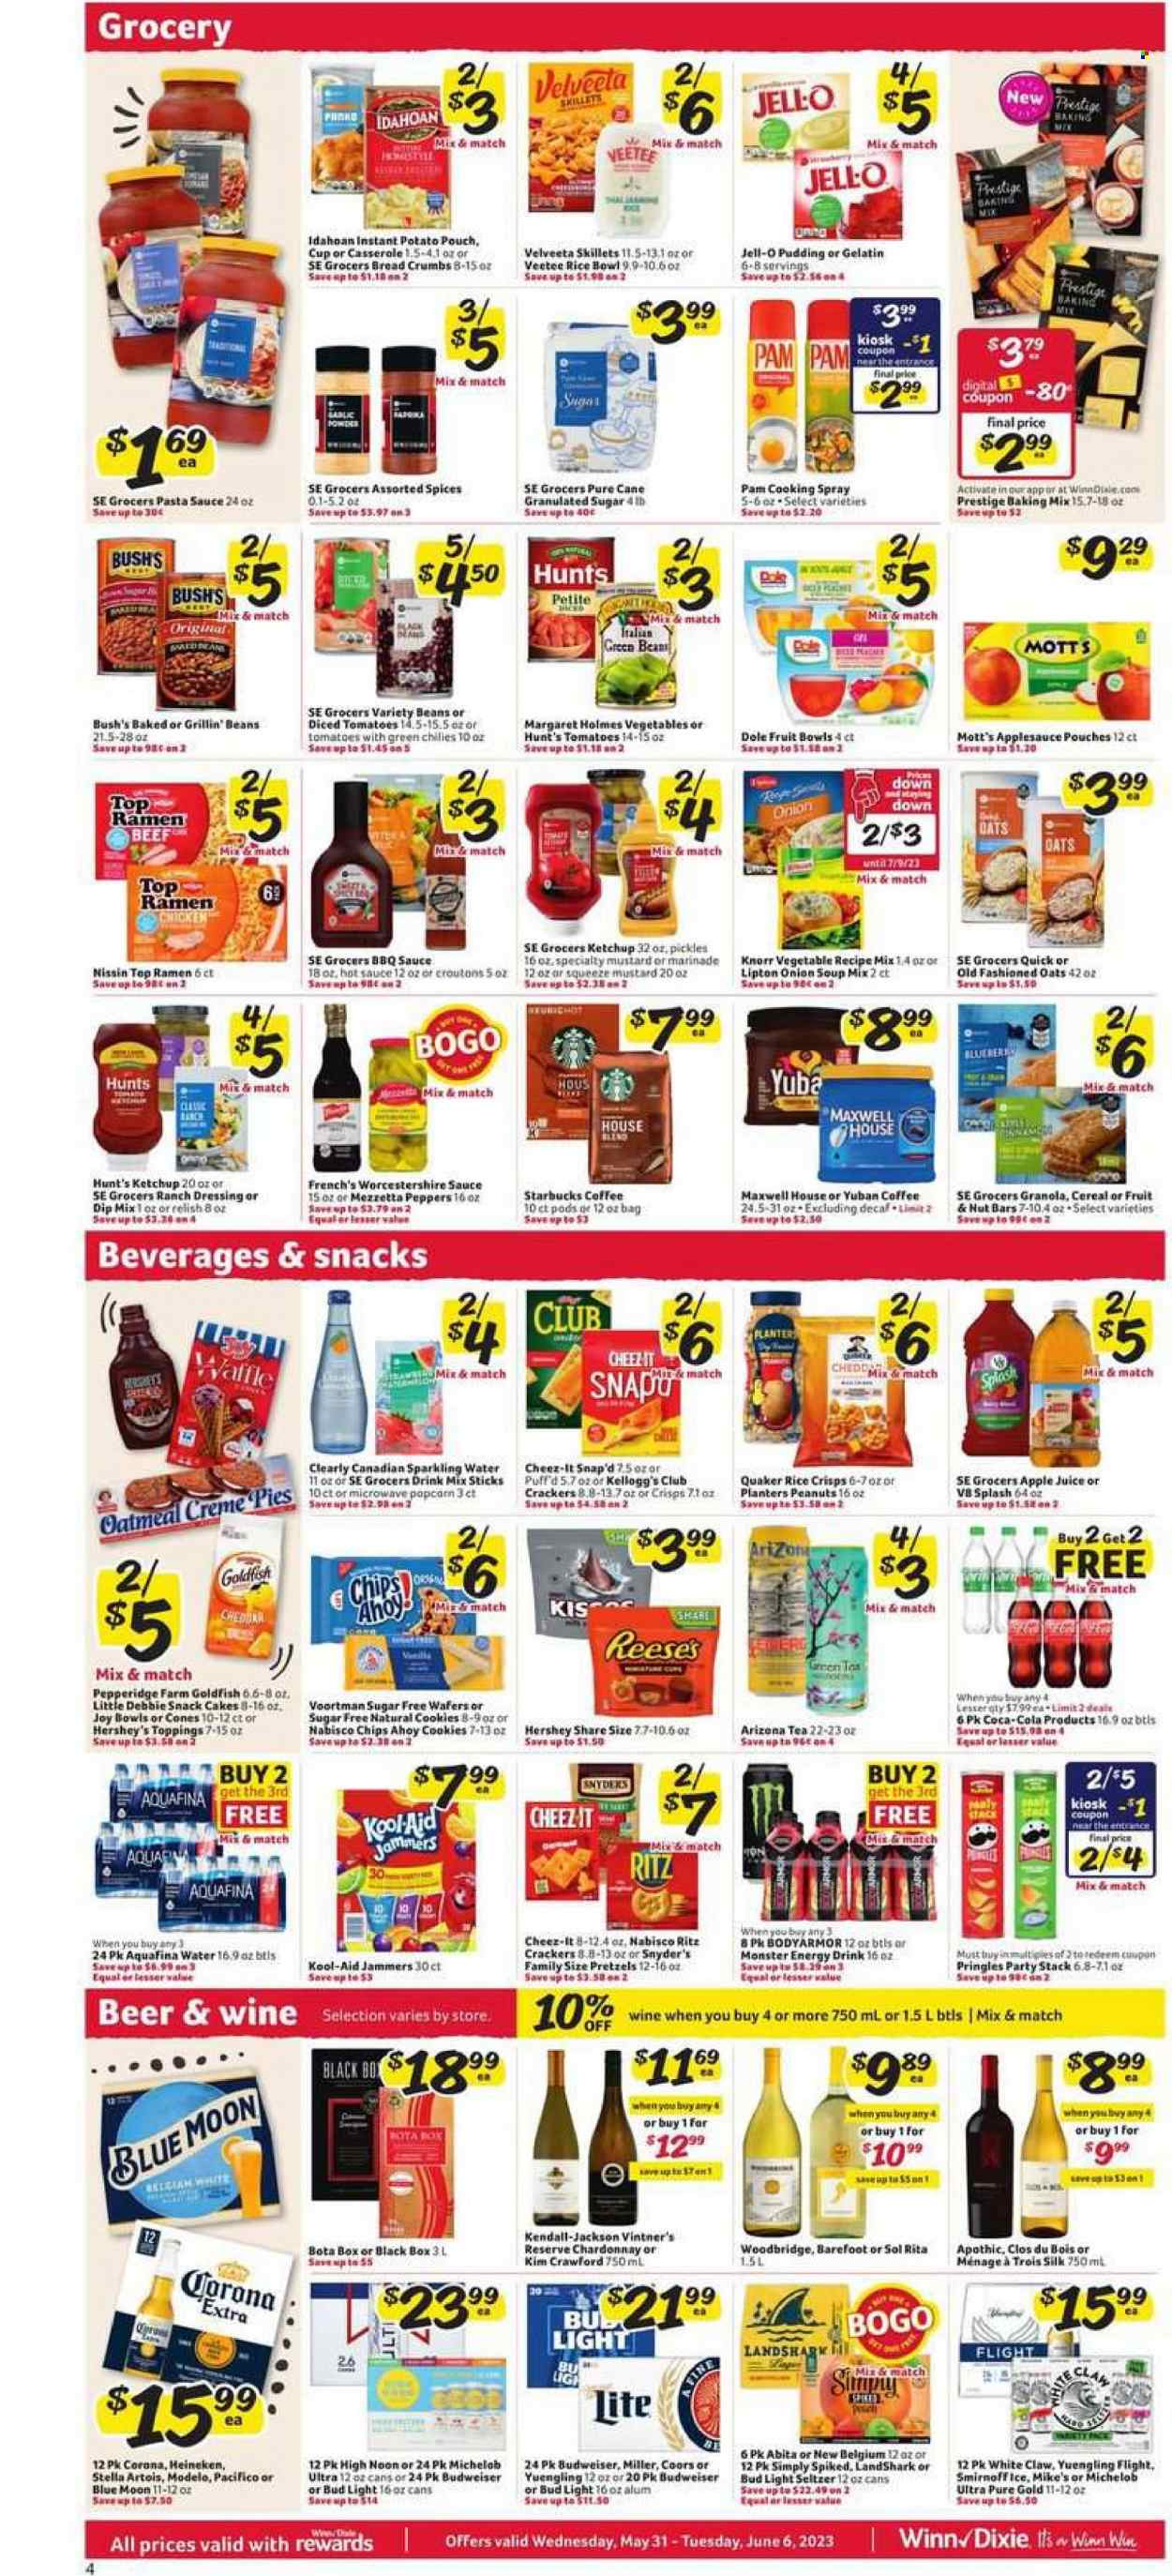 thumbnail - Winn Dixie Flyer - 05/31/2023 - 06/06/2023 - Sales products - pretzels, cake, breadcrumbs, green beans, Dole, fruit cup, Mott's, ramen, pasta sauce, onion soup, soup mix, soup, Knorr, sauce, Top Ramen, Quaker, Nissin, snack, cheese, pudding, Silk, ranch dressing, Reese's, Hershey's, cookies, wafers, crackers, Kellogg's, RITZ, Nabisco, Pringles, popcorn, Goldfish, Cheez-It, rice crisps, salty snack, croutons, granulated sugar, oatmeal, Jell-O, baking mix, pickles, baked beans, diced tomatoes, cereals, granola, nut bar, BBQ sauce, mustard, worcestershire sauce, hot sauce, ketchup, dressing, marinade, cooking spray, apple sauce, peanuts, Planters, apple juice, Coca-Cola, lemonade, juice, energy drink, Monster, Lipton, soft drink, Monster Energy, AriZona, Aquafina, sparkling water, water, powder drink, Maxwell House, tea, coffee, Starbucks, white wine, Chardonnay, wine, alcohol, Woodbridge, Kim Crawford, Smirnoff, White Claw, Hard Seltzer, Stella Artois, Bud Light, Corona Extra, Heineken, Modelo, chicken, Joy, casserole, plant pot, Budweiser, Coors, Blue Moon, Yuengling, Michelob. Page 5.